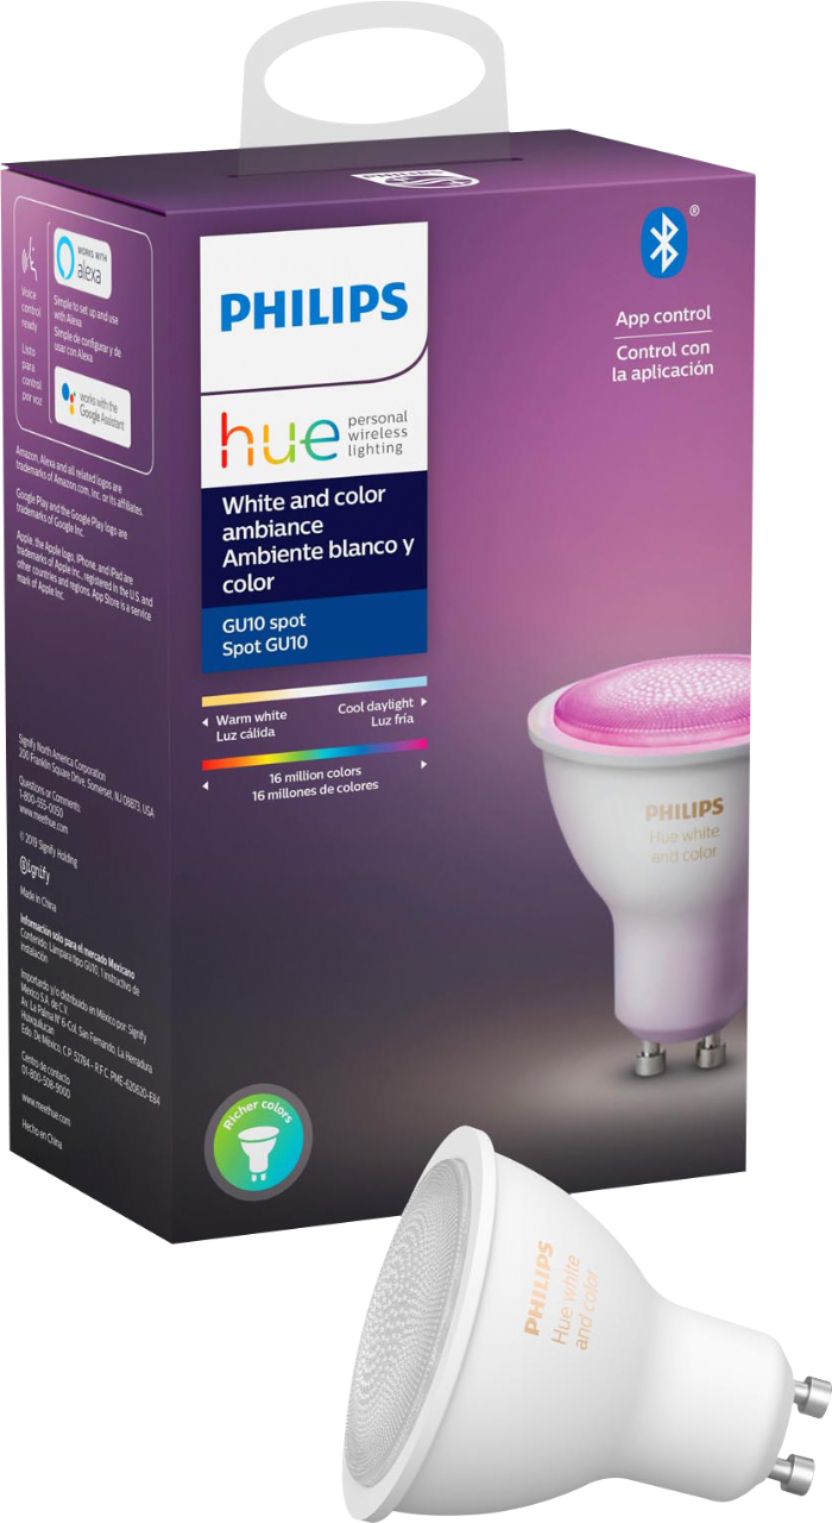 Philips Hue Smart LED Bulb White and Color 542332 - Best